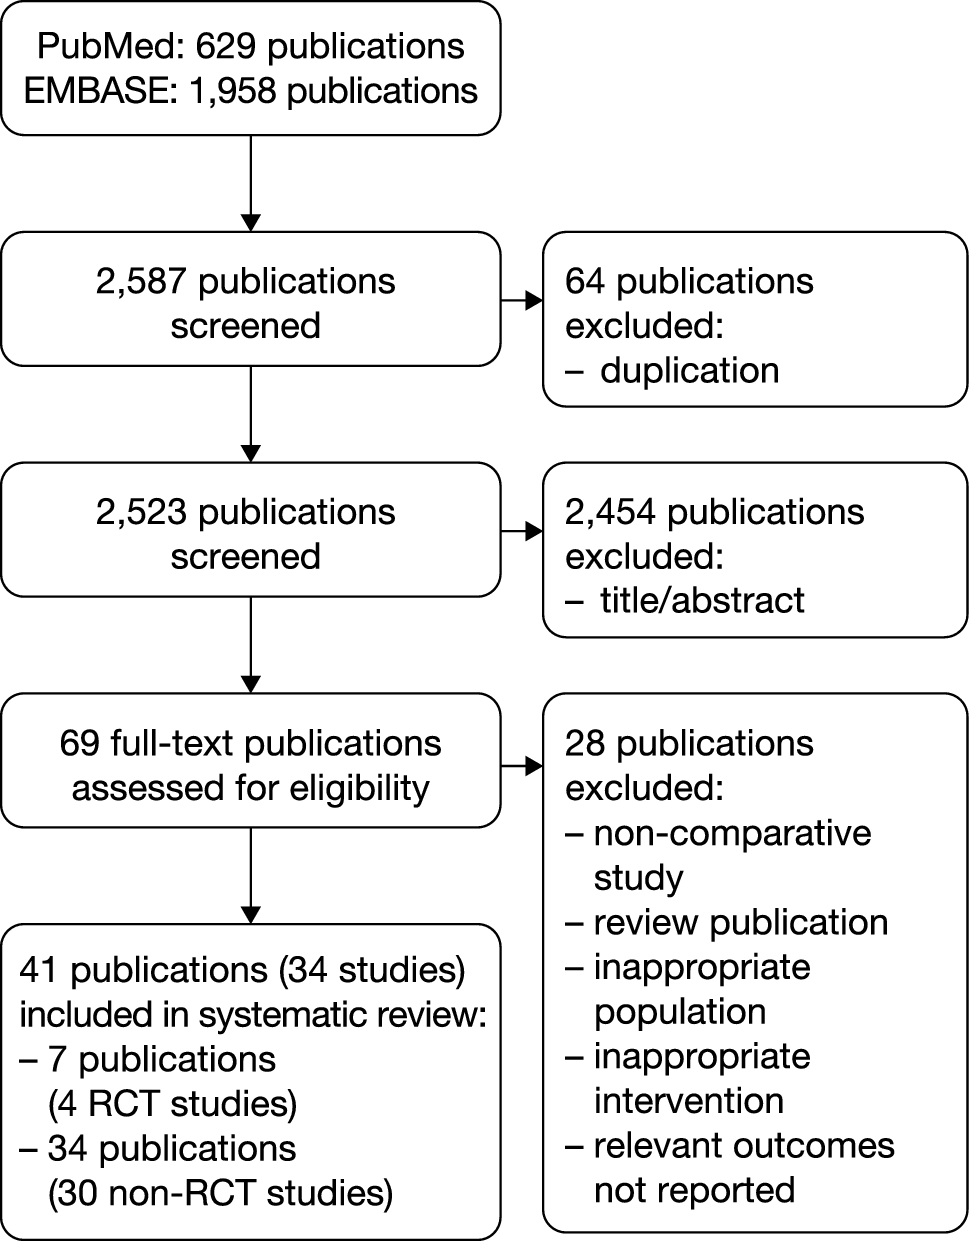 Survival Benefit of Myeloablative Therapy with Autologous Stem Cell Transplantation in High-Risk Neuroblastoma: A Systematic Literature Review